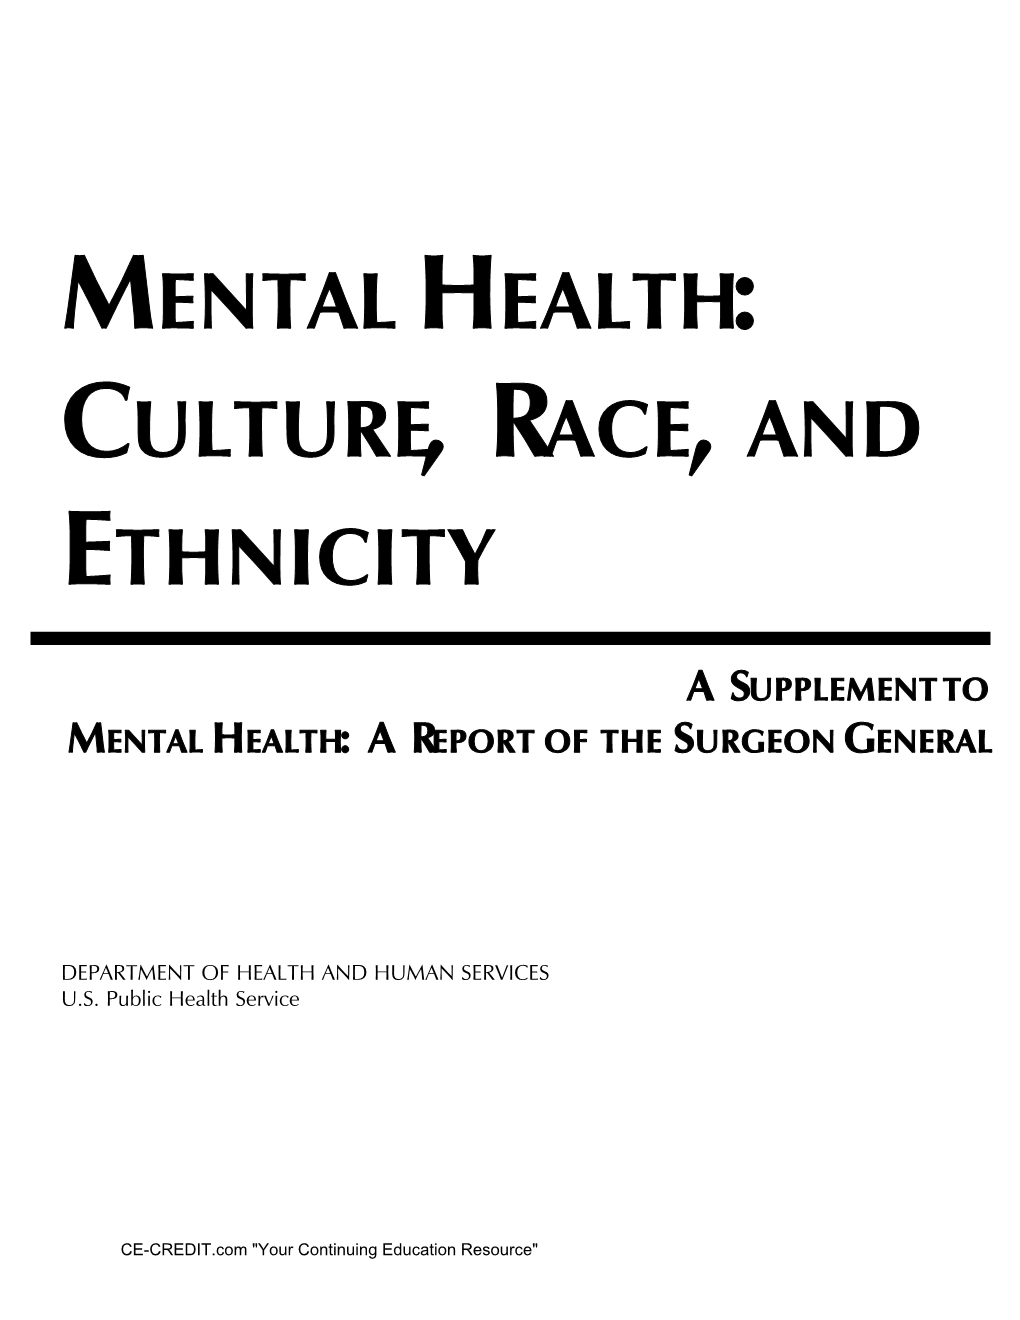 Mental Health: Culture, Race, and Ethnicity